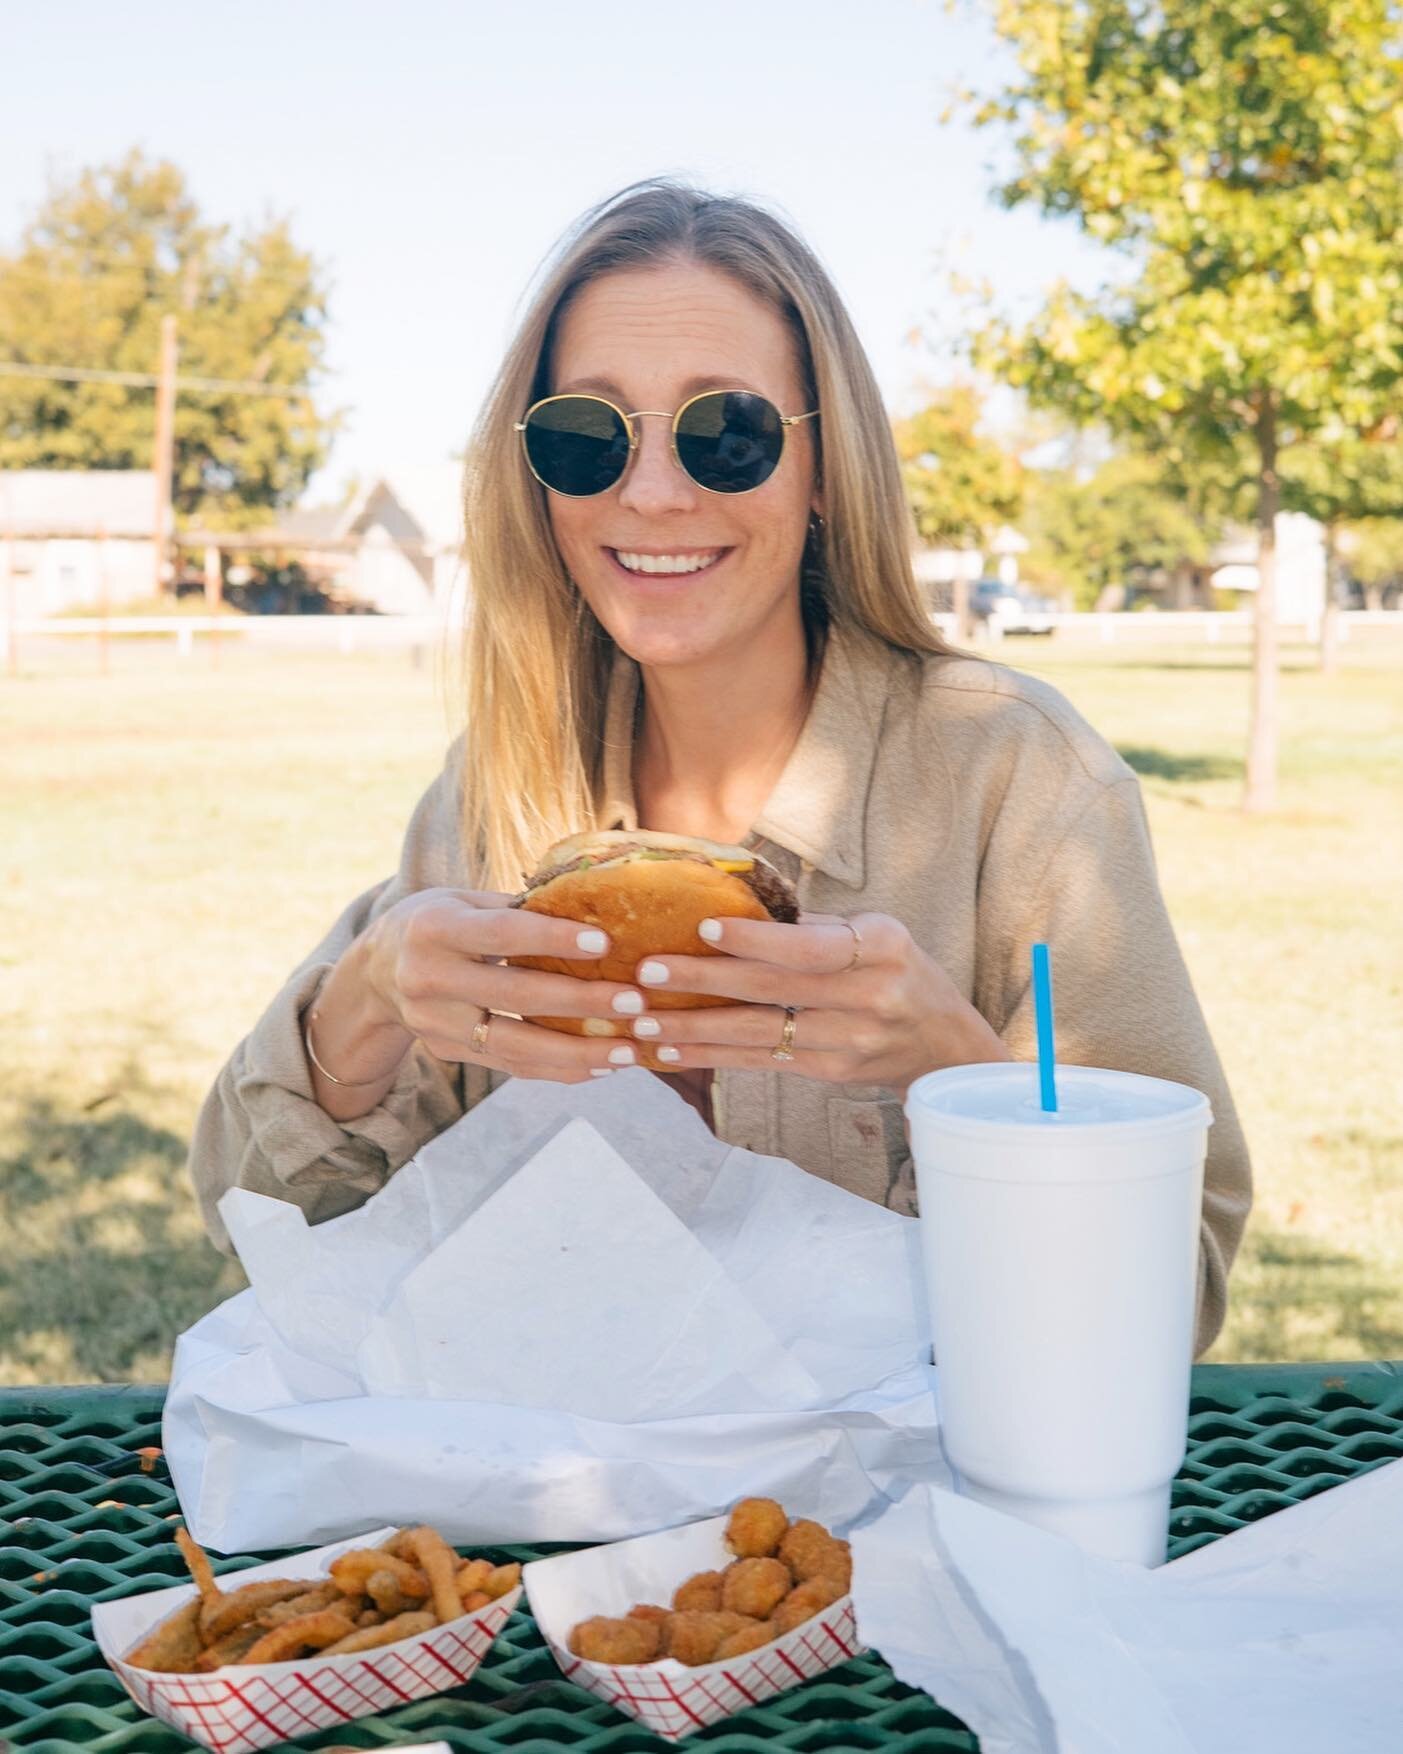 Y&rsquo;all ever had Bevo&rsquo;s Drive-In in Vernon, TX? 
⠀⠀⠀⠀⠀⠀⠀⠀⠀
Side note: It was good and the local park was a perfect place to stop mid road trip and let Jax play in the grass while mom and dad ate and ate and ate